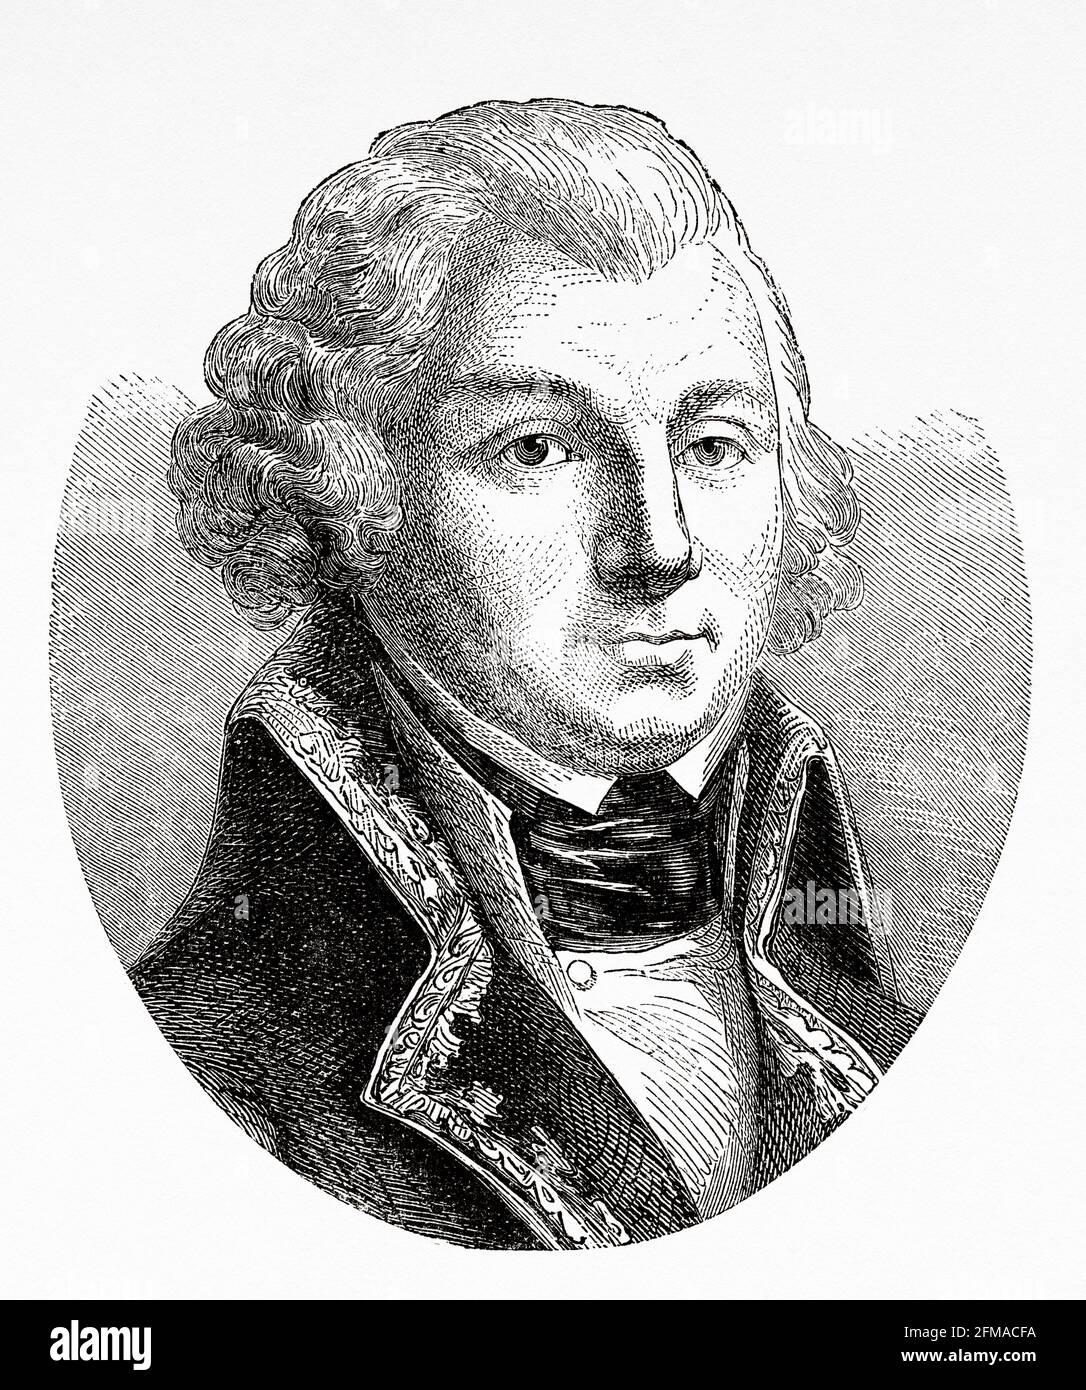 Portrait of Jean-Baptiste Jourdan (1762-1833) 1st Count Jourdan, was a French military commander. Marshal of the Empire by Emperor Napoleon I in 1804. France. Old 19th century engraved illustration from Histoire de la Revolution Francaise 1876 by Jules Michelet (1798-1874) Stock Photo